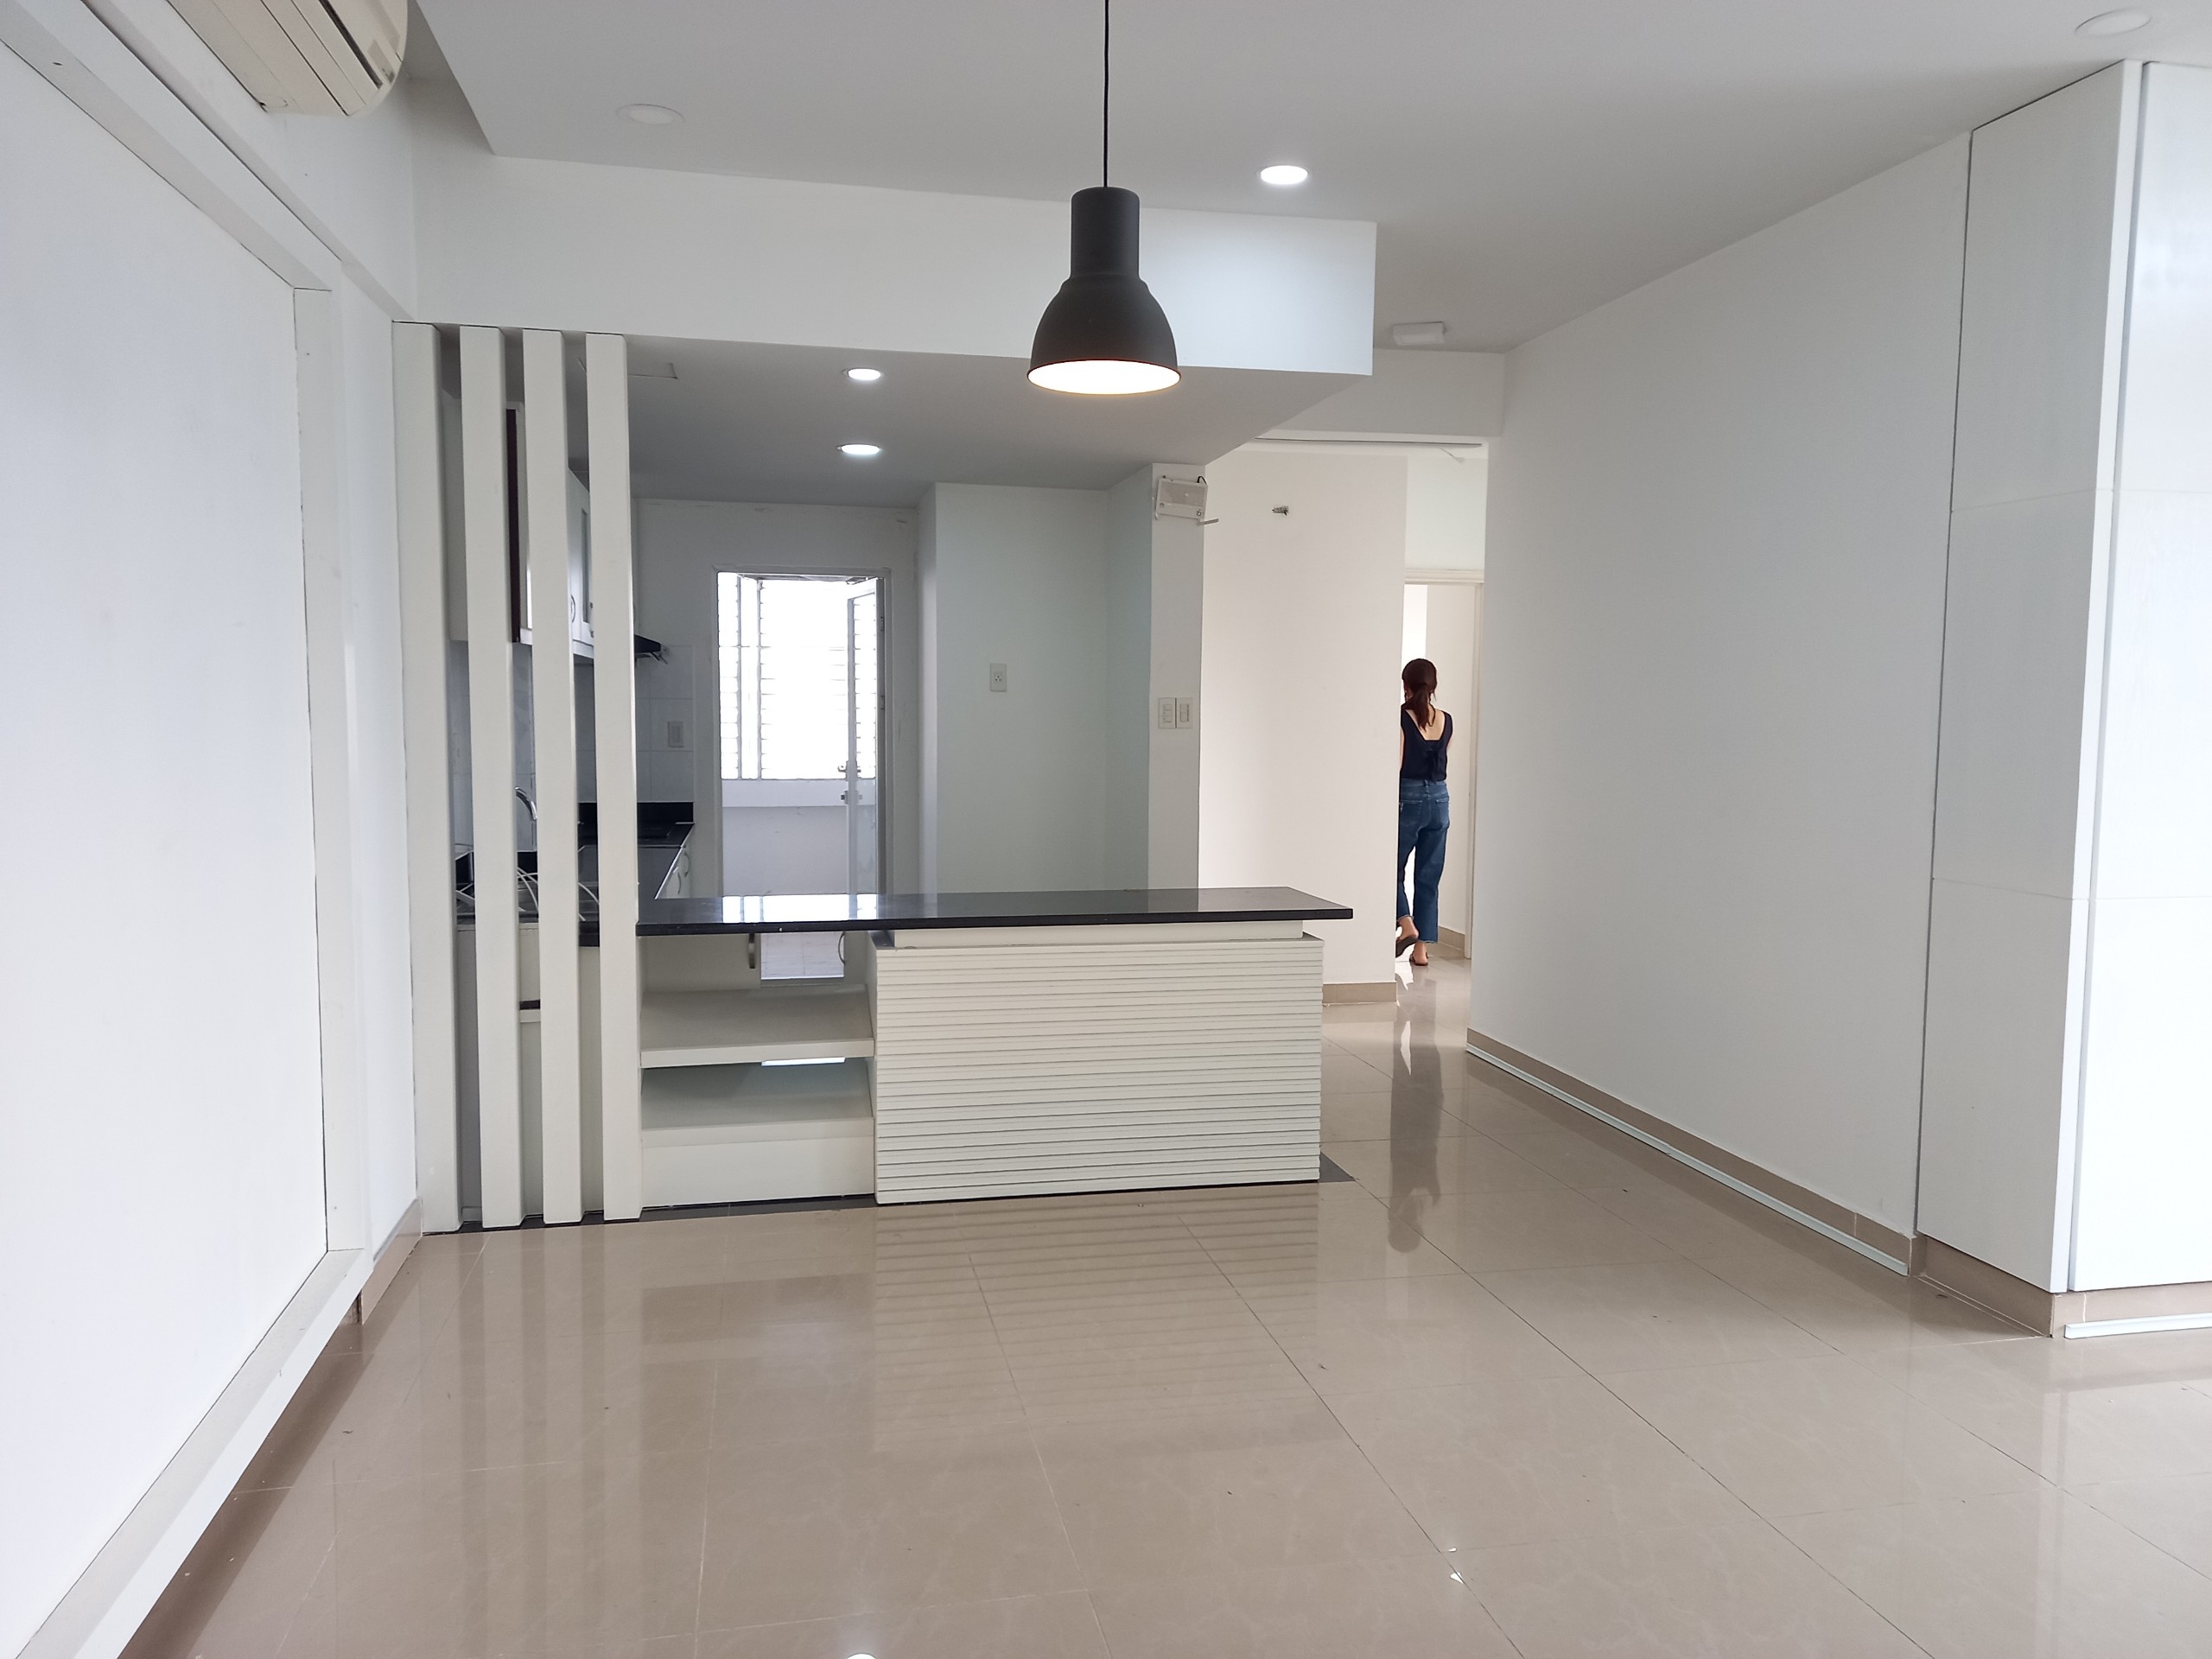 No option apartment for rent near SSIS school